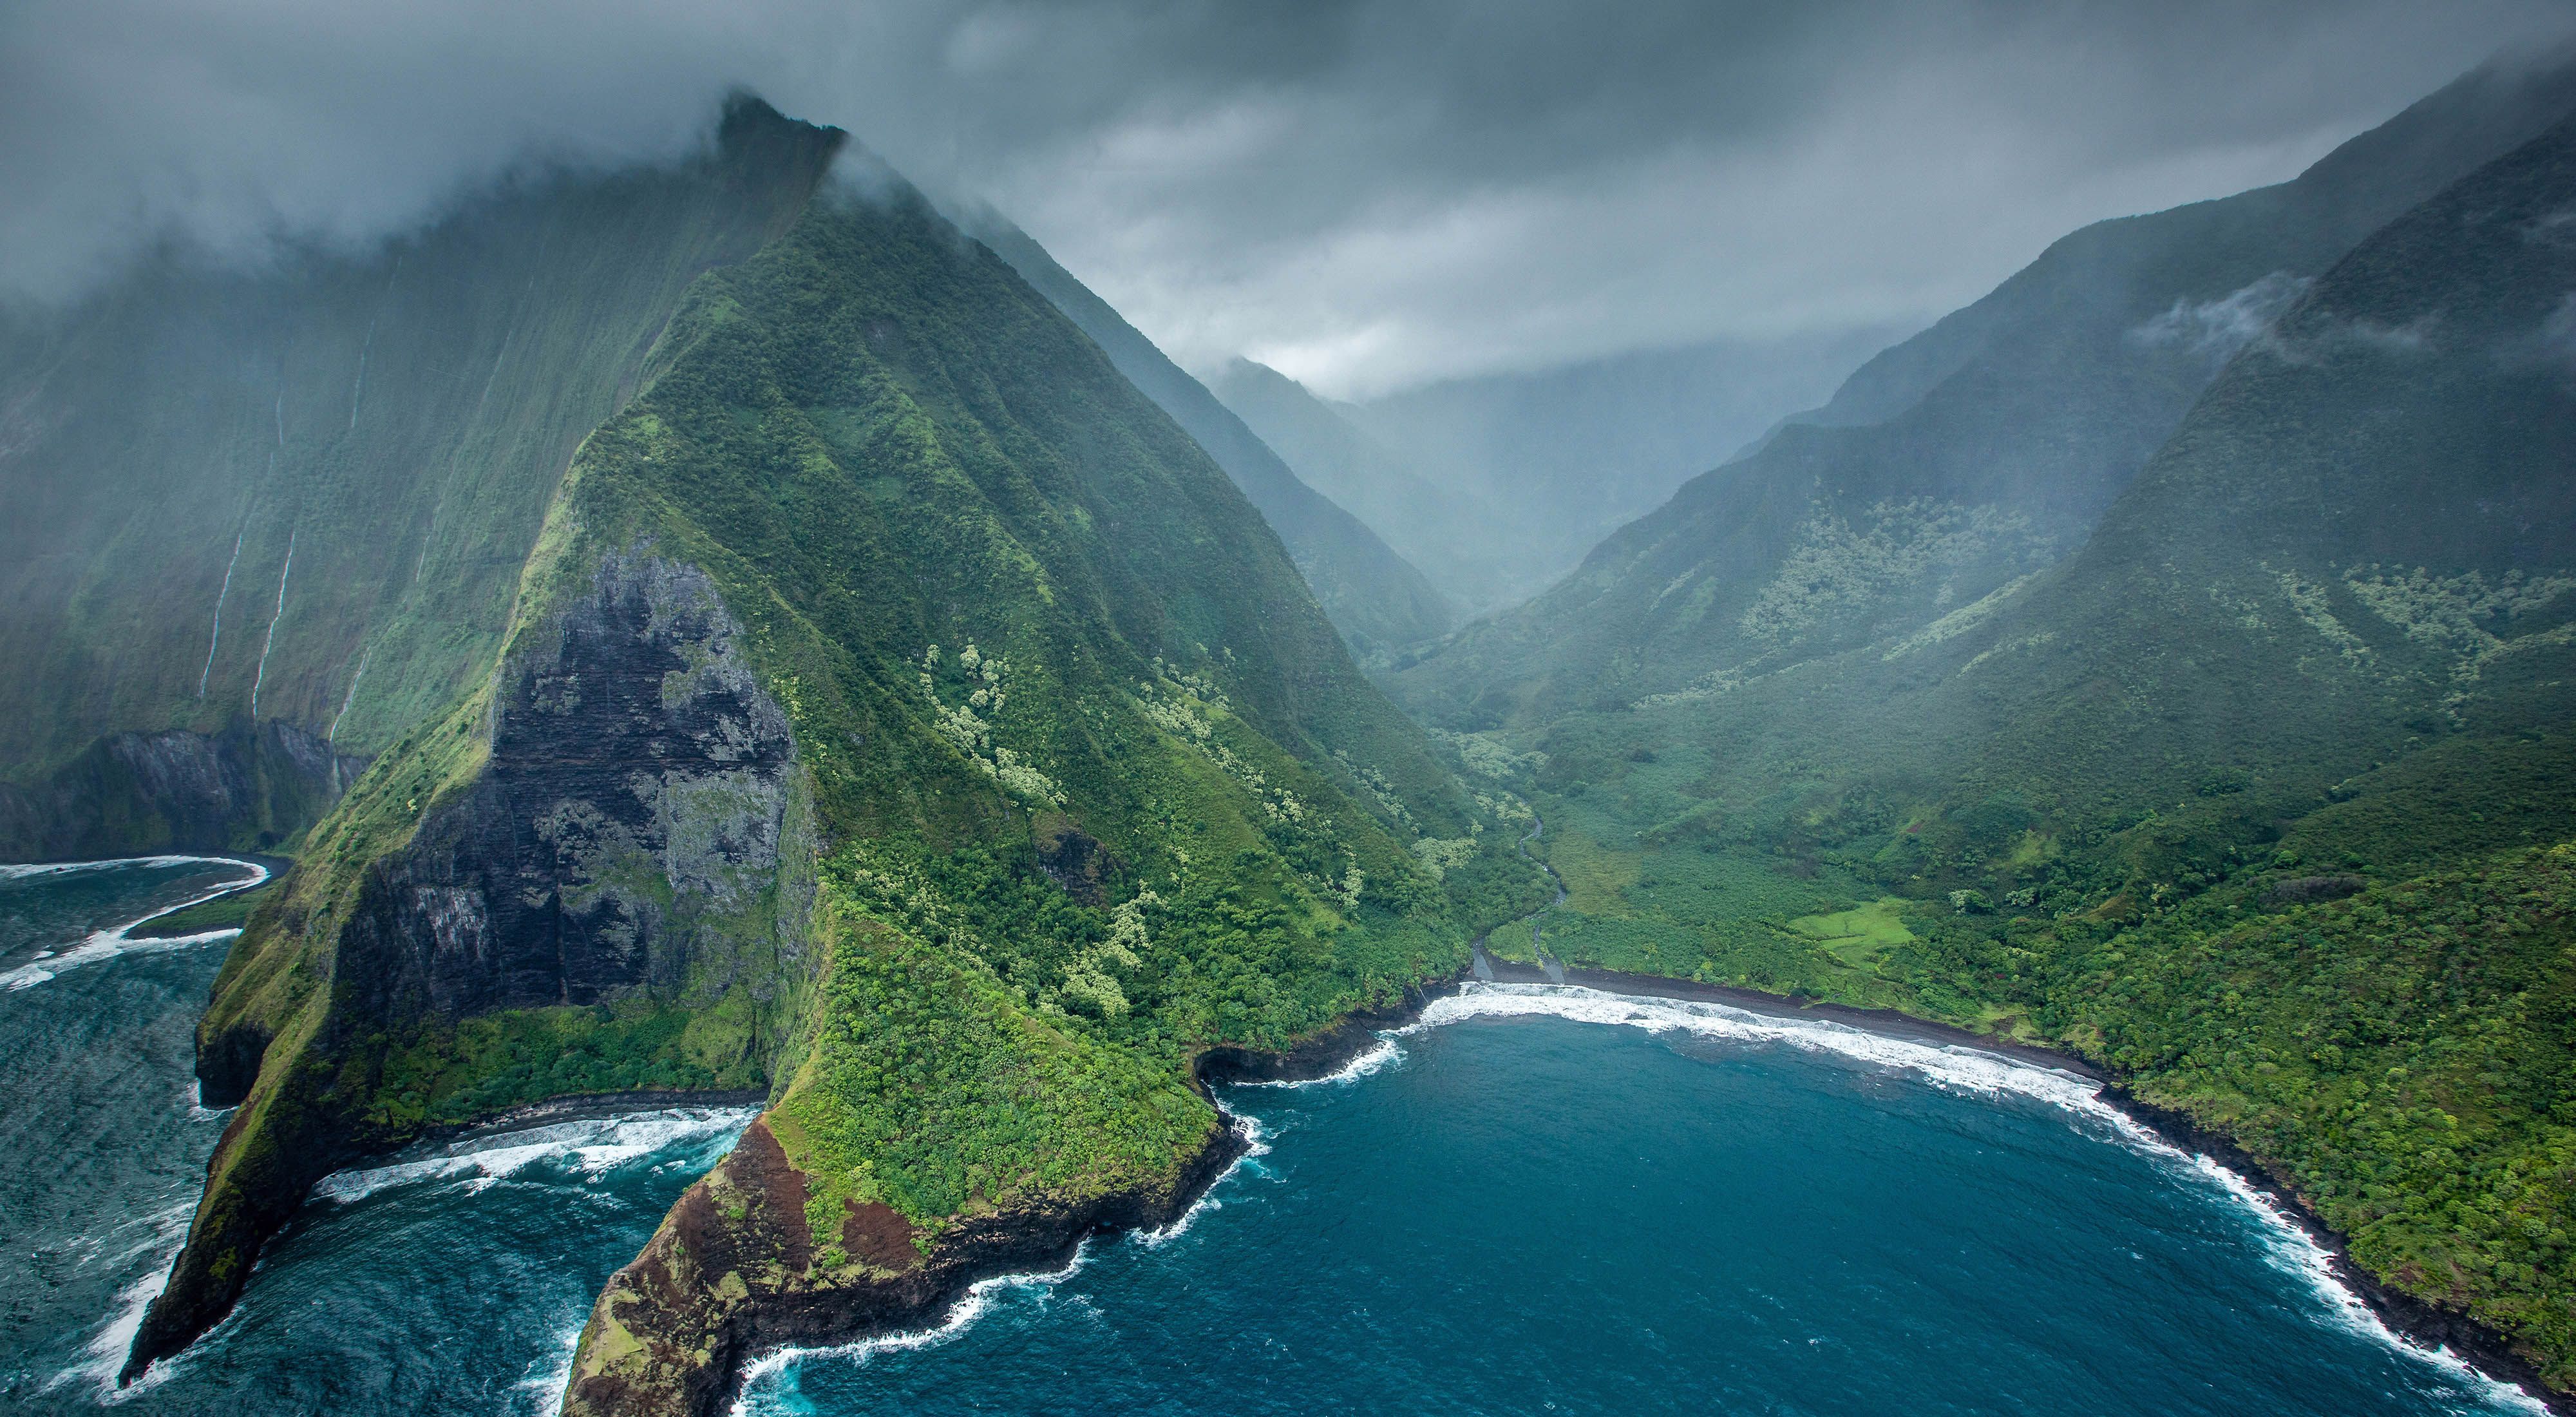 Aerial view of steep, craggy, green mountains jutting into blue ocean waters of Hawaii.